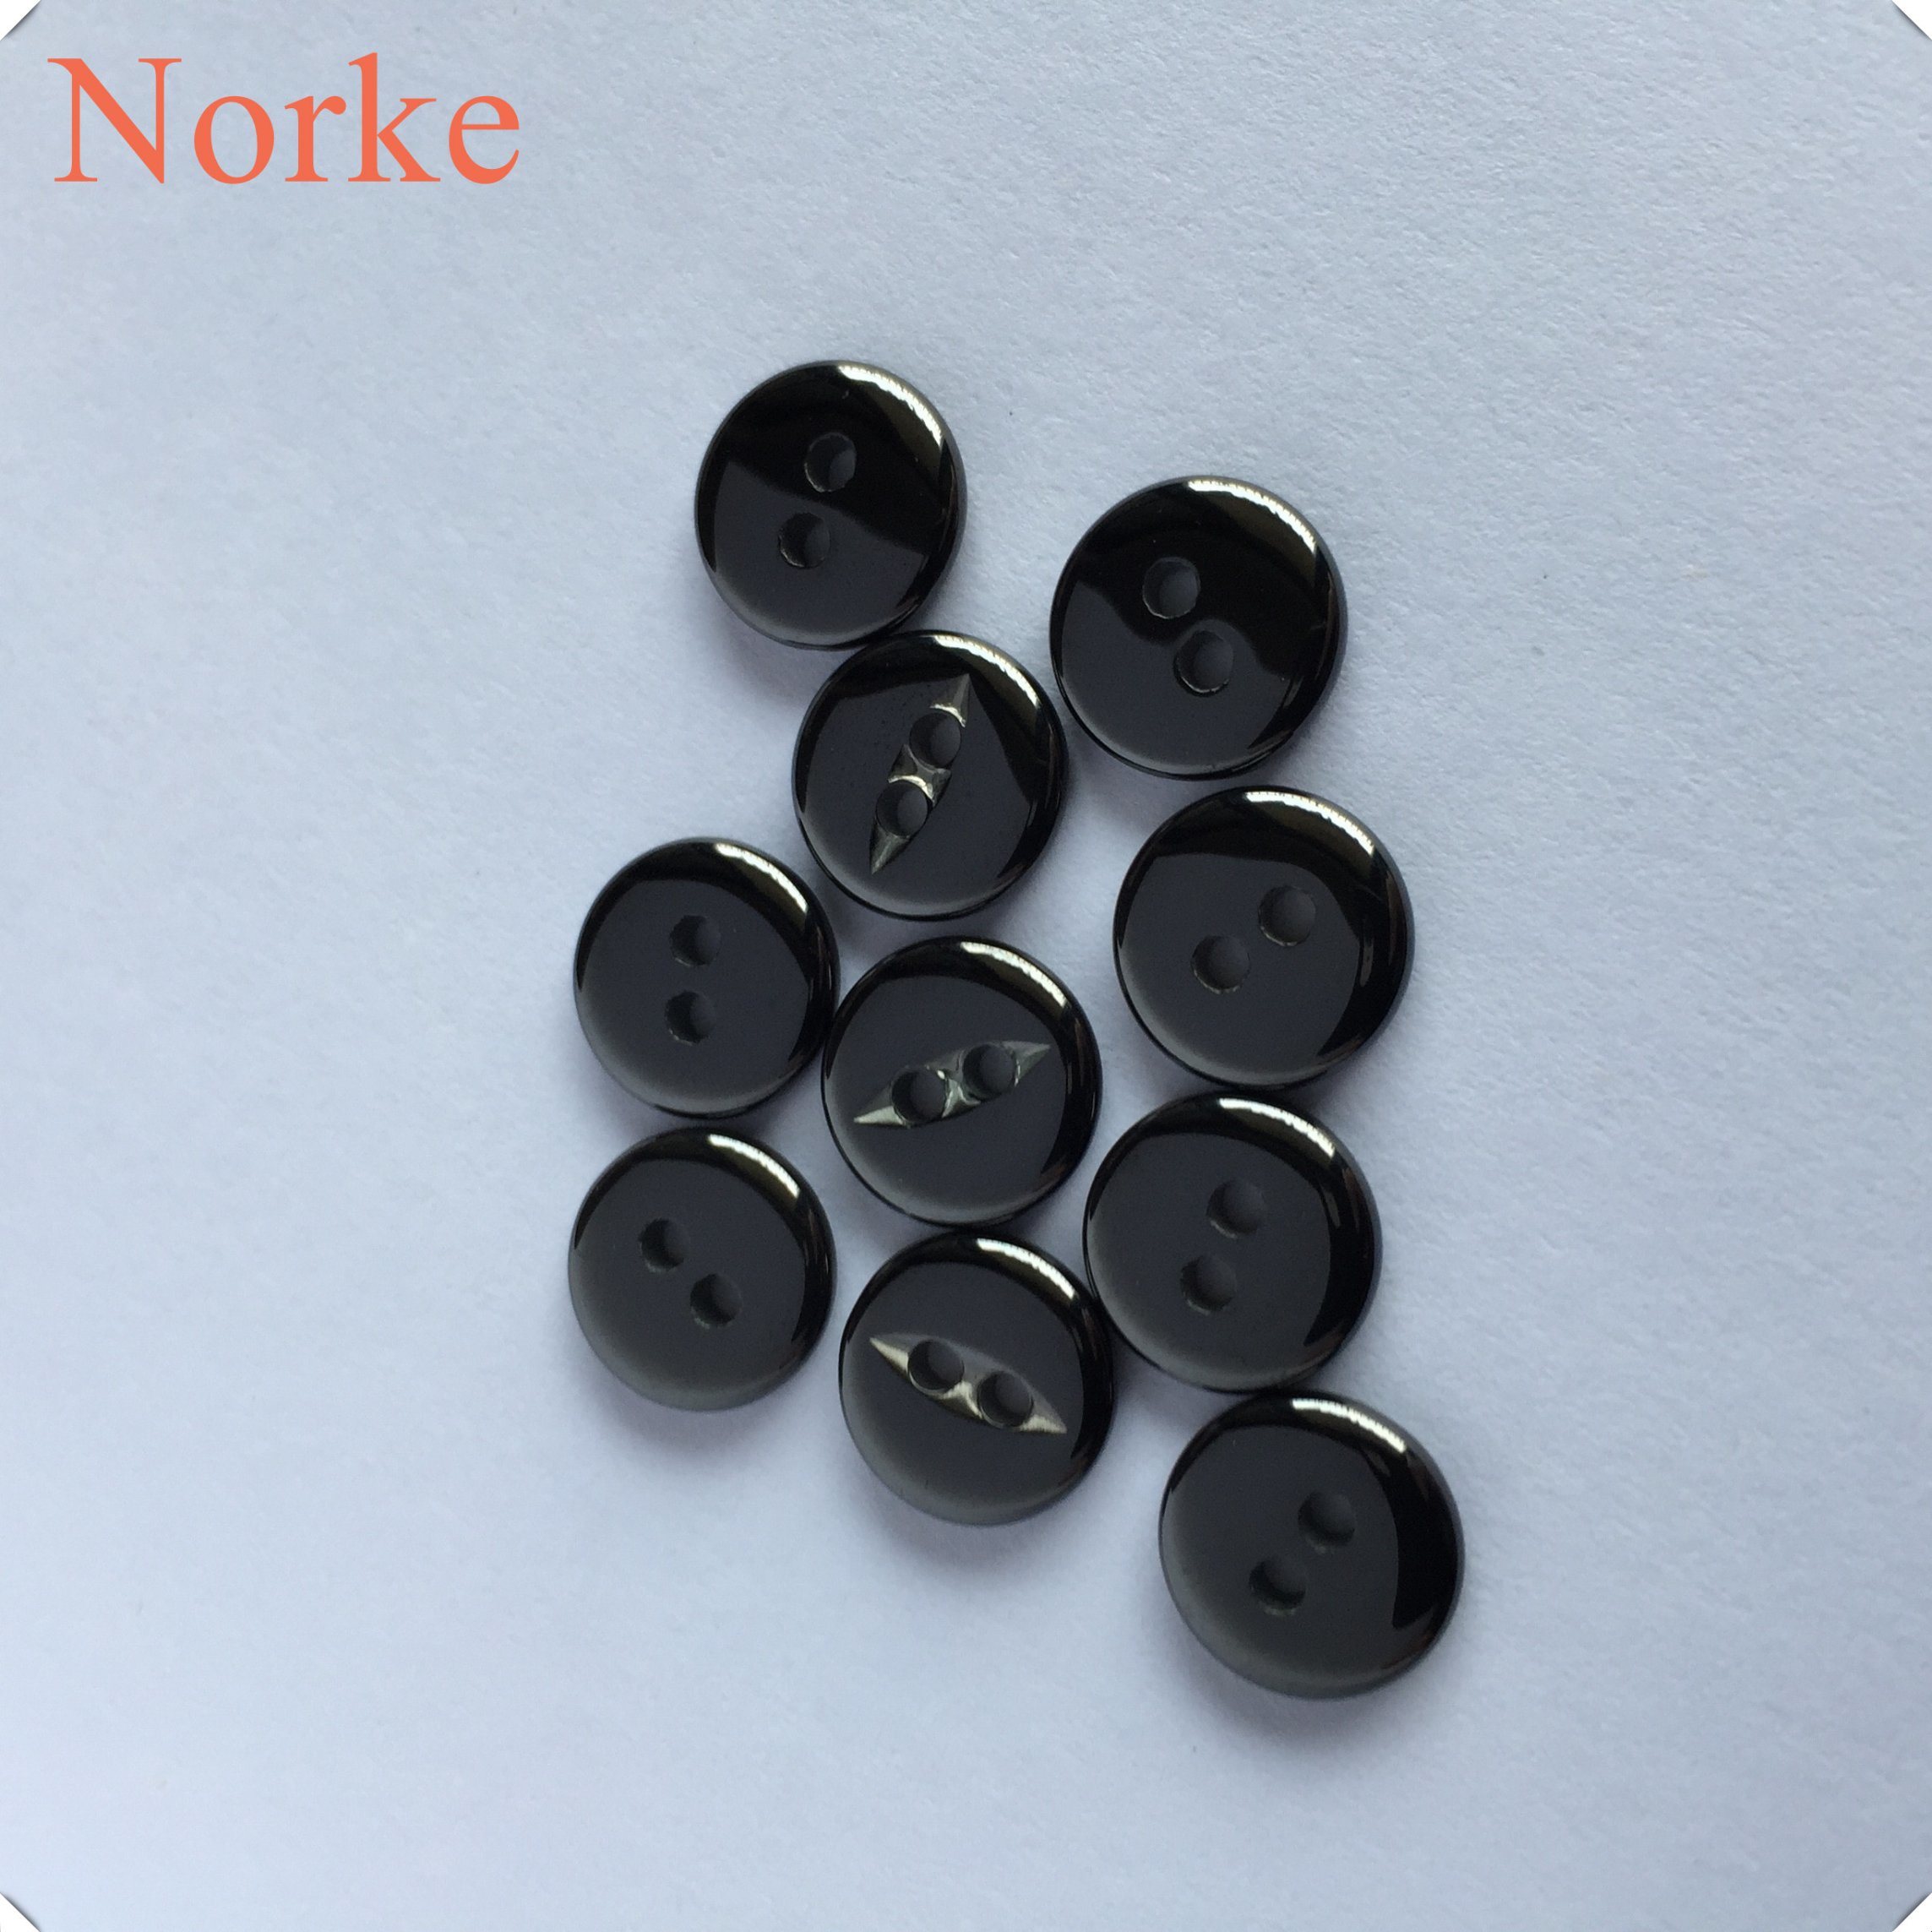 Fancy 2 Holes Sewing Ceramic Buttons